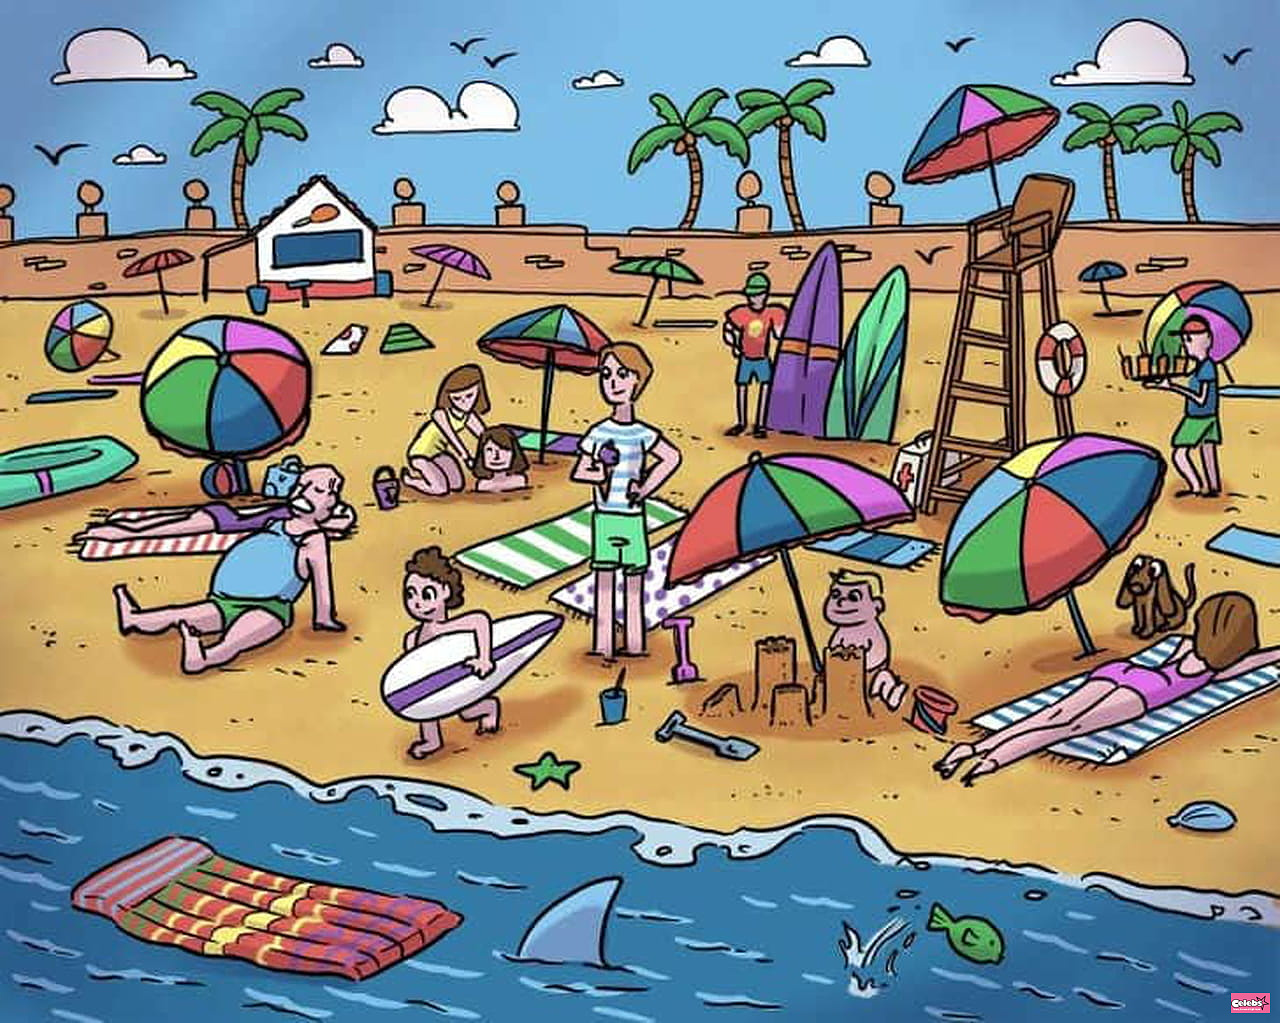 A tiny beach ball is well hidden in this image, unearth it and show your observation skills